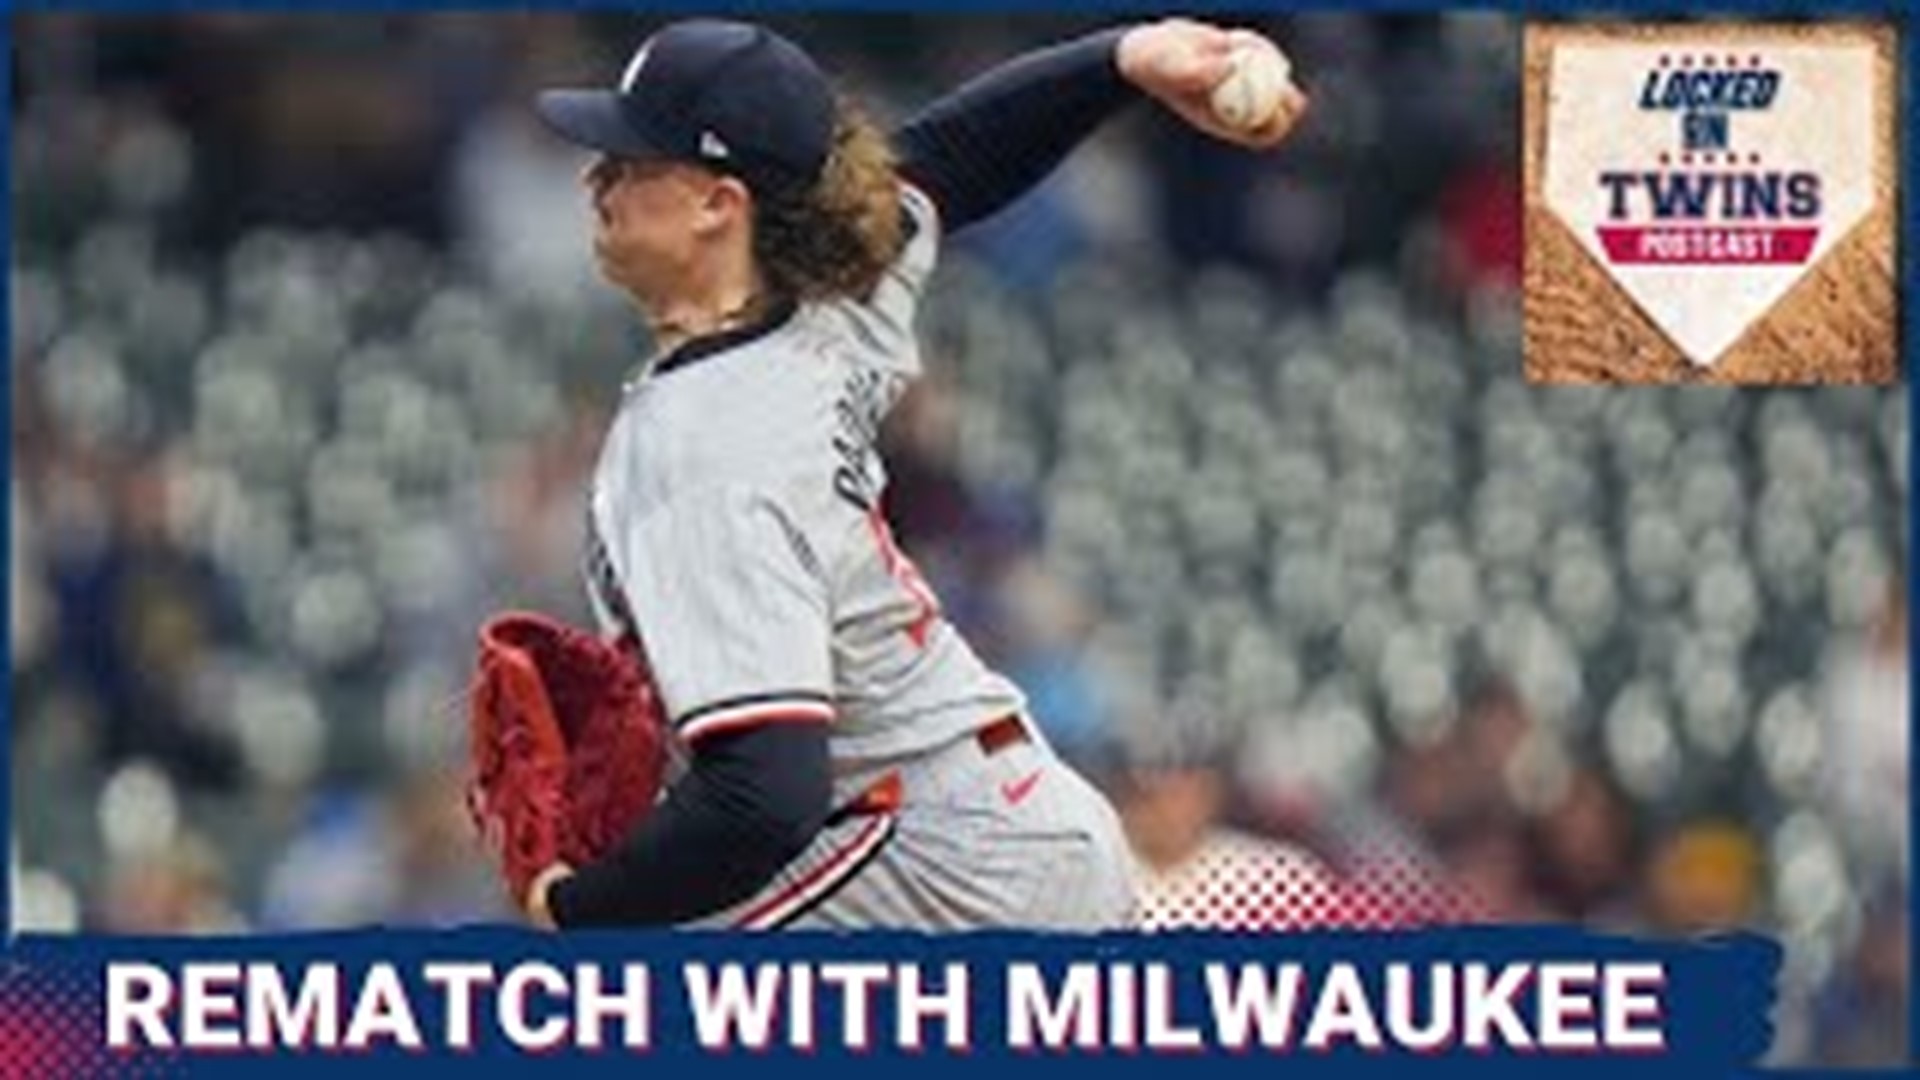 The Minnesota Twins earned a split with the Milwaukee Brewers with a 7-3 win thanks to a 5-run seventh inning. Chris Paddack also made his season debut on the mound.